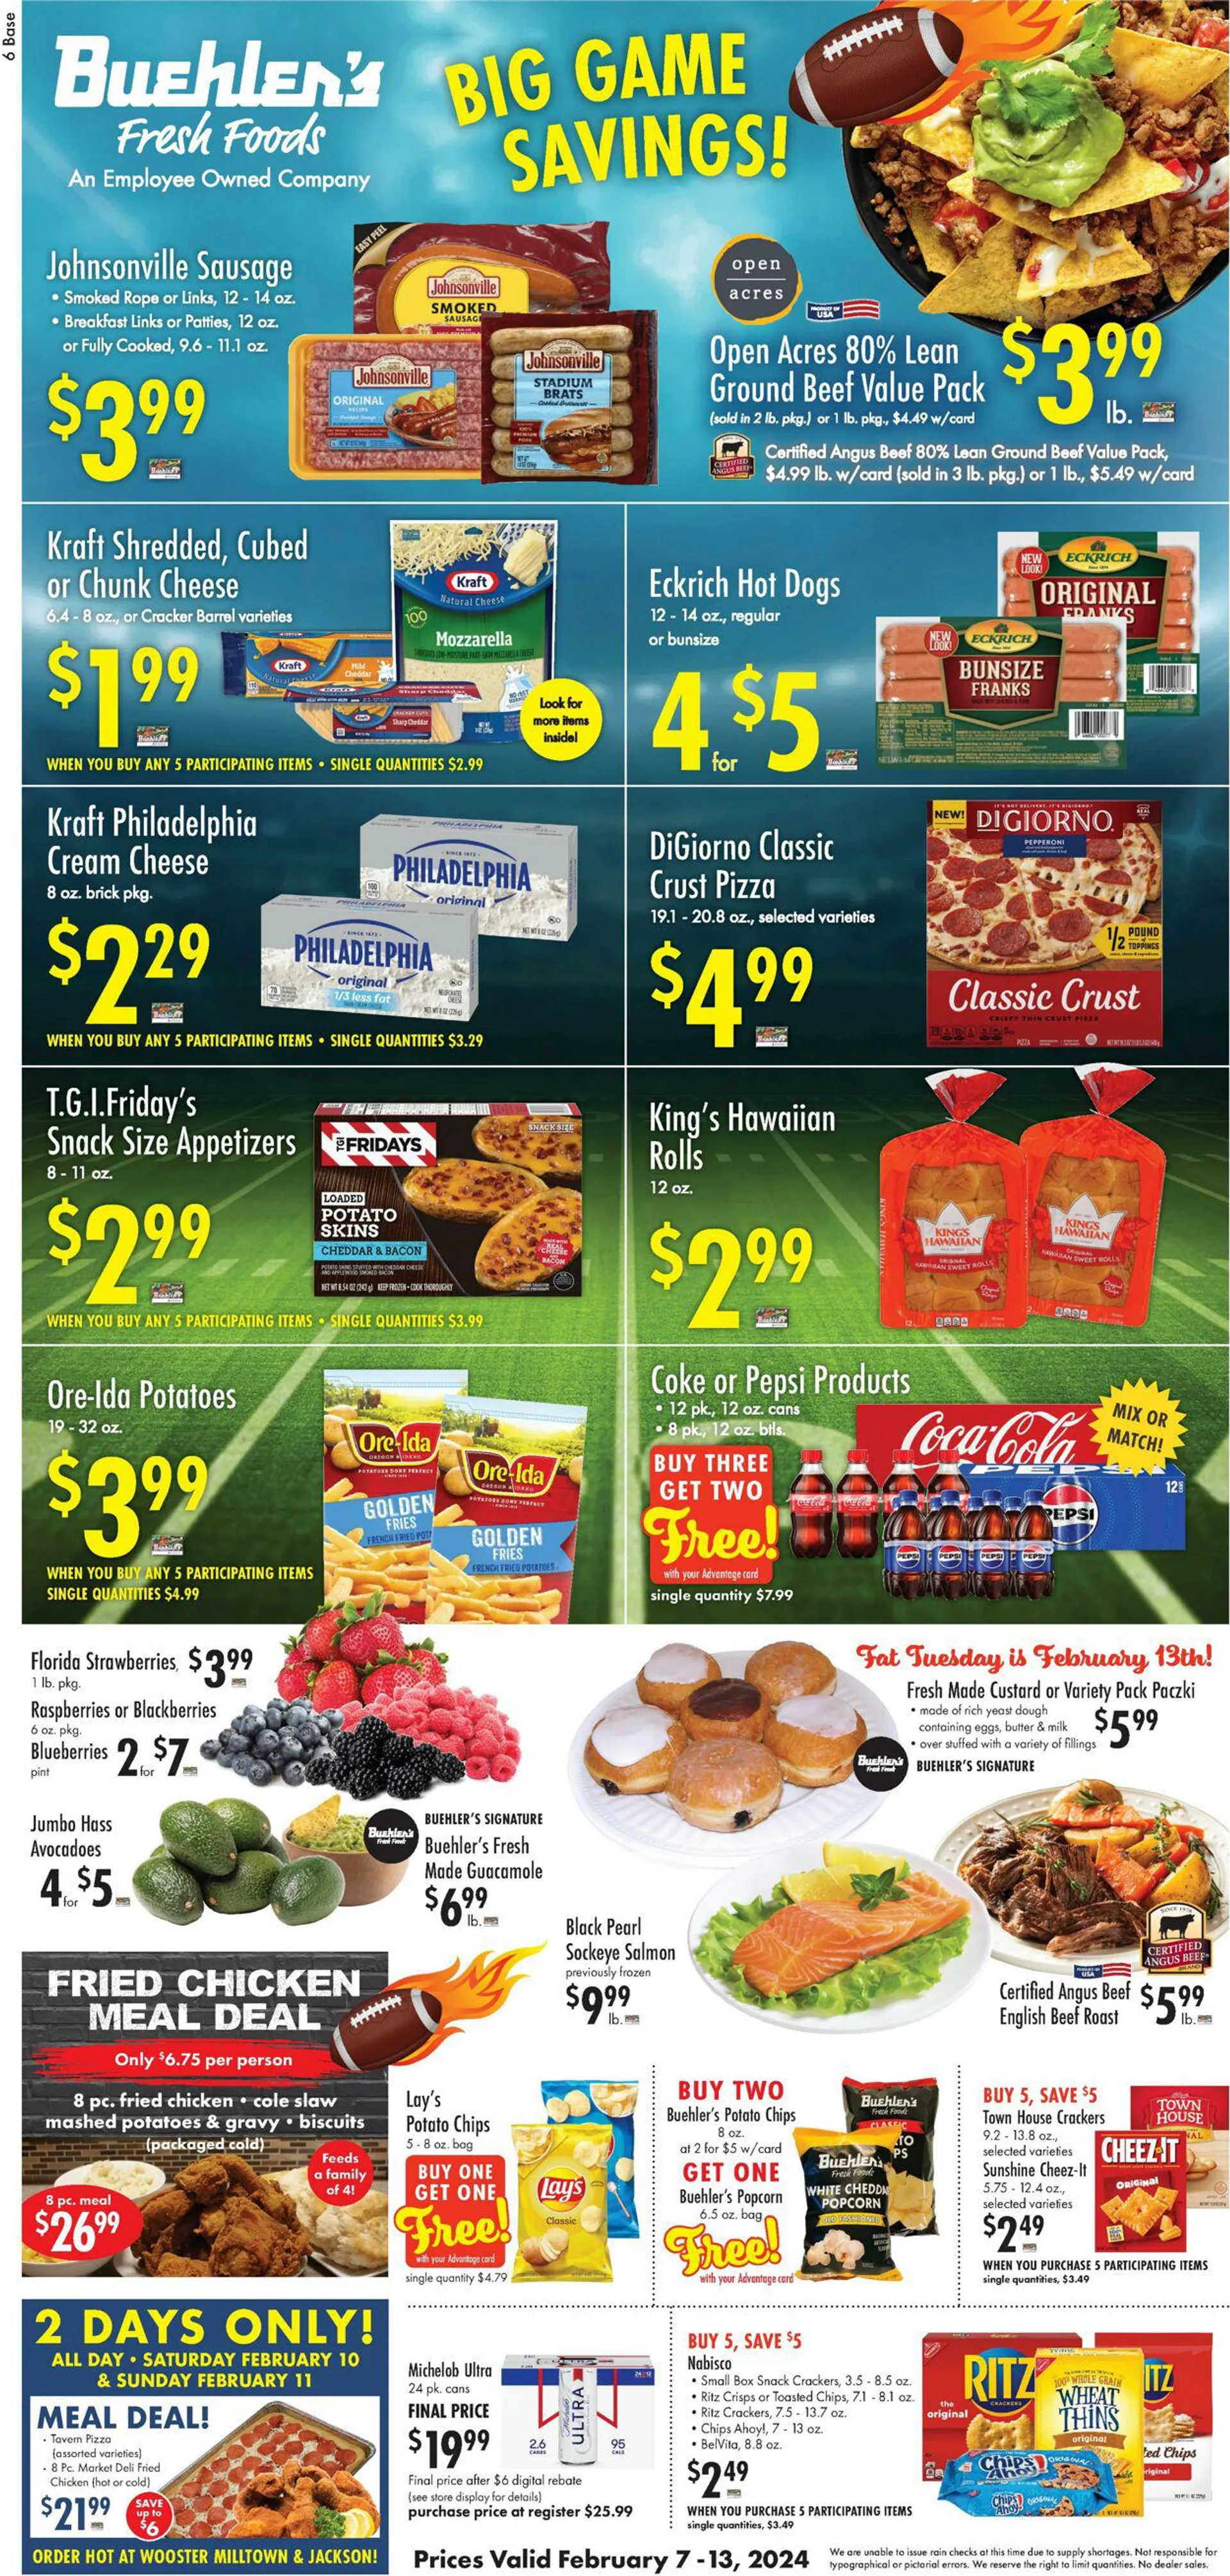 Weekly ad Buehler's Fresh Food from February 7 to February 13 2024 - Page 1